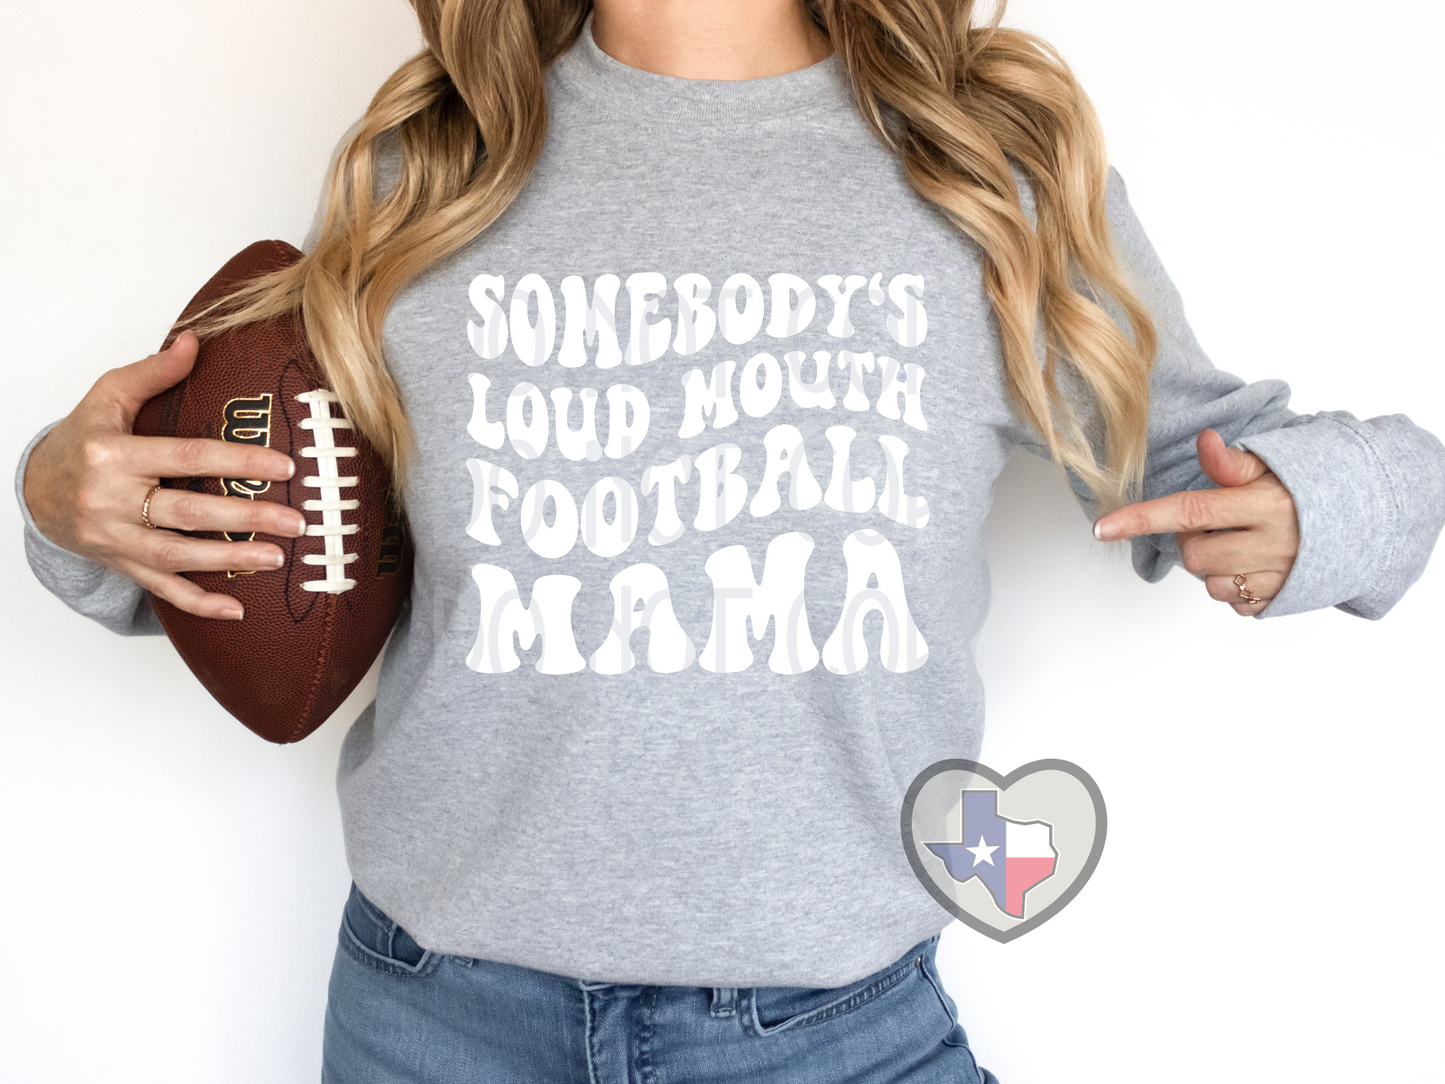 RESTOCK Arriving 8/25 Loud Mouth Football Mama